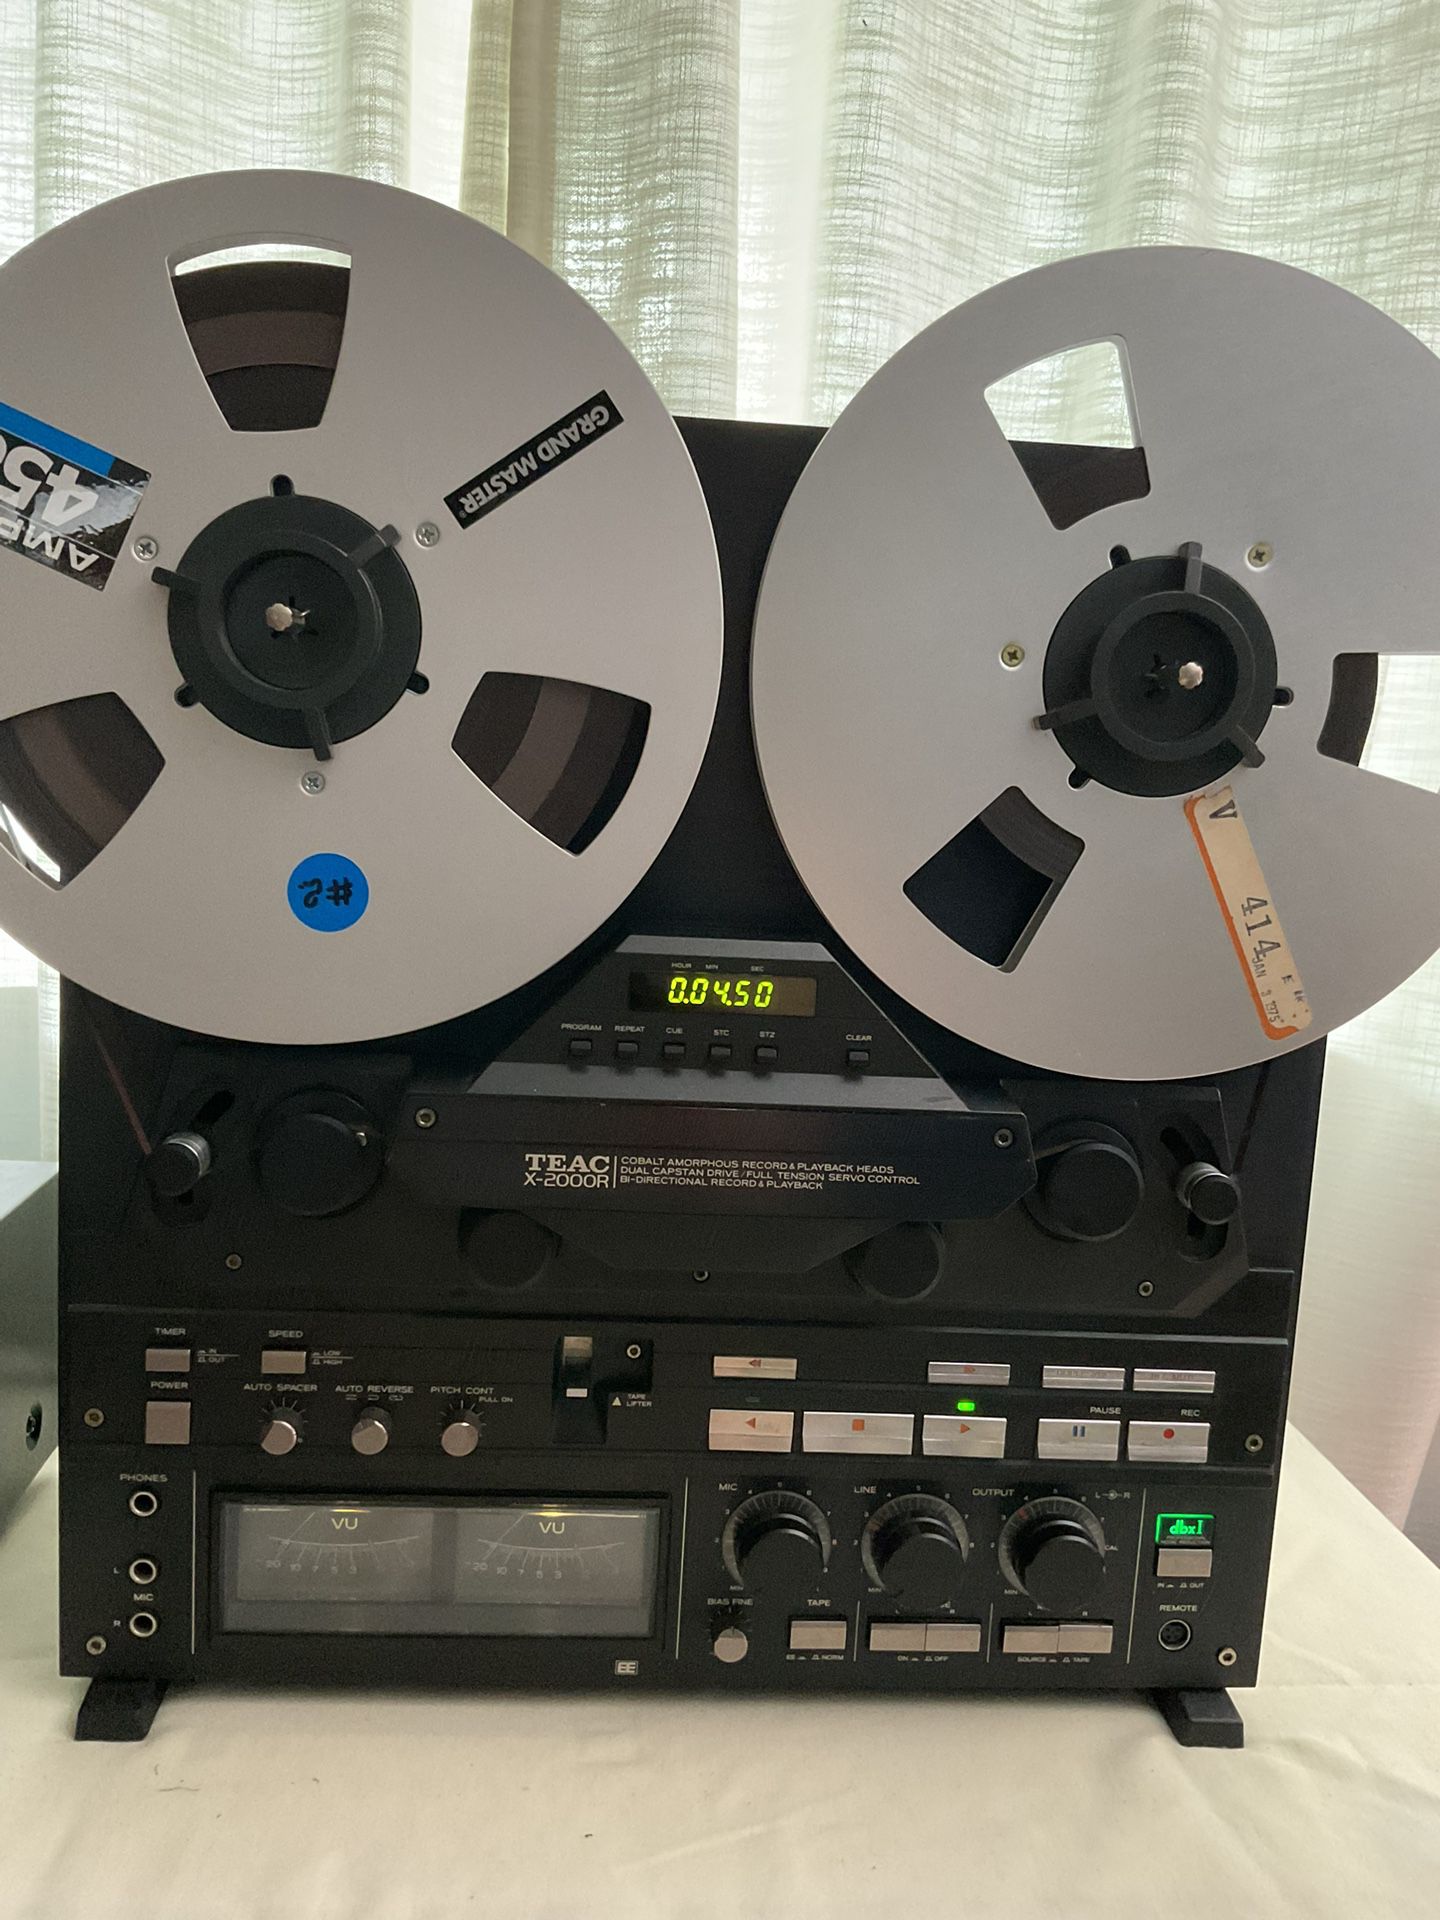 Teac X2000R Reel To Reel Tape Deck Auto Reverse for Sale in Boca